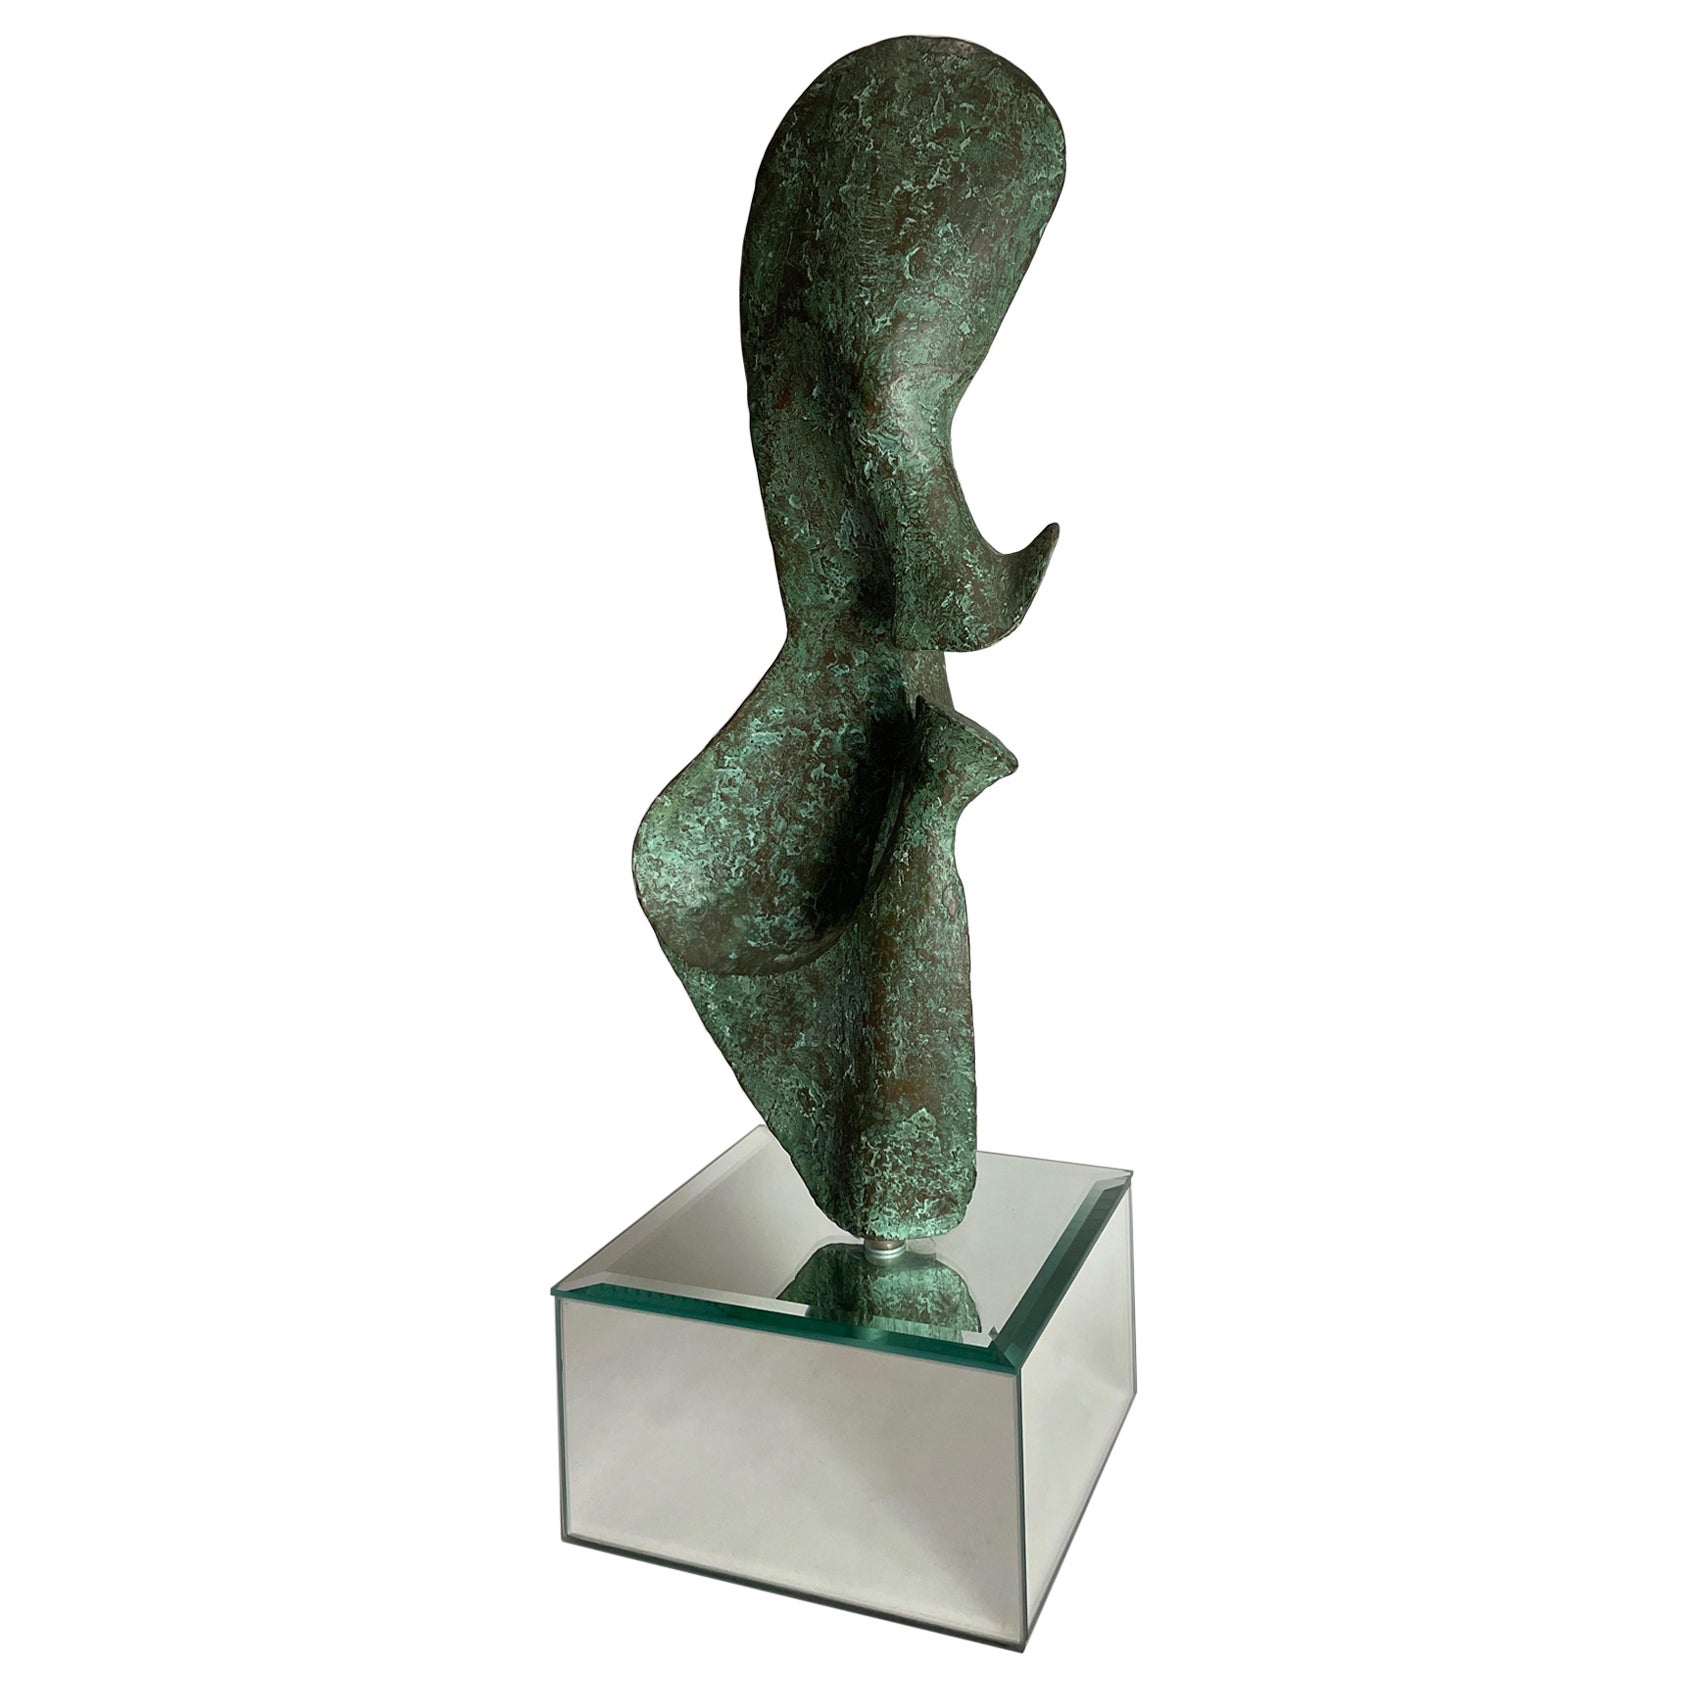 Bronze Sculpture by Leonardo Nierman, Signed and Numbered